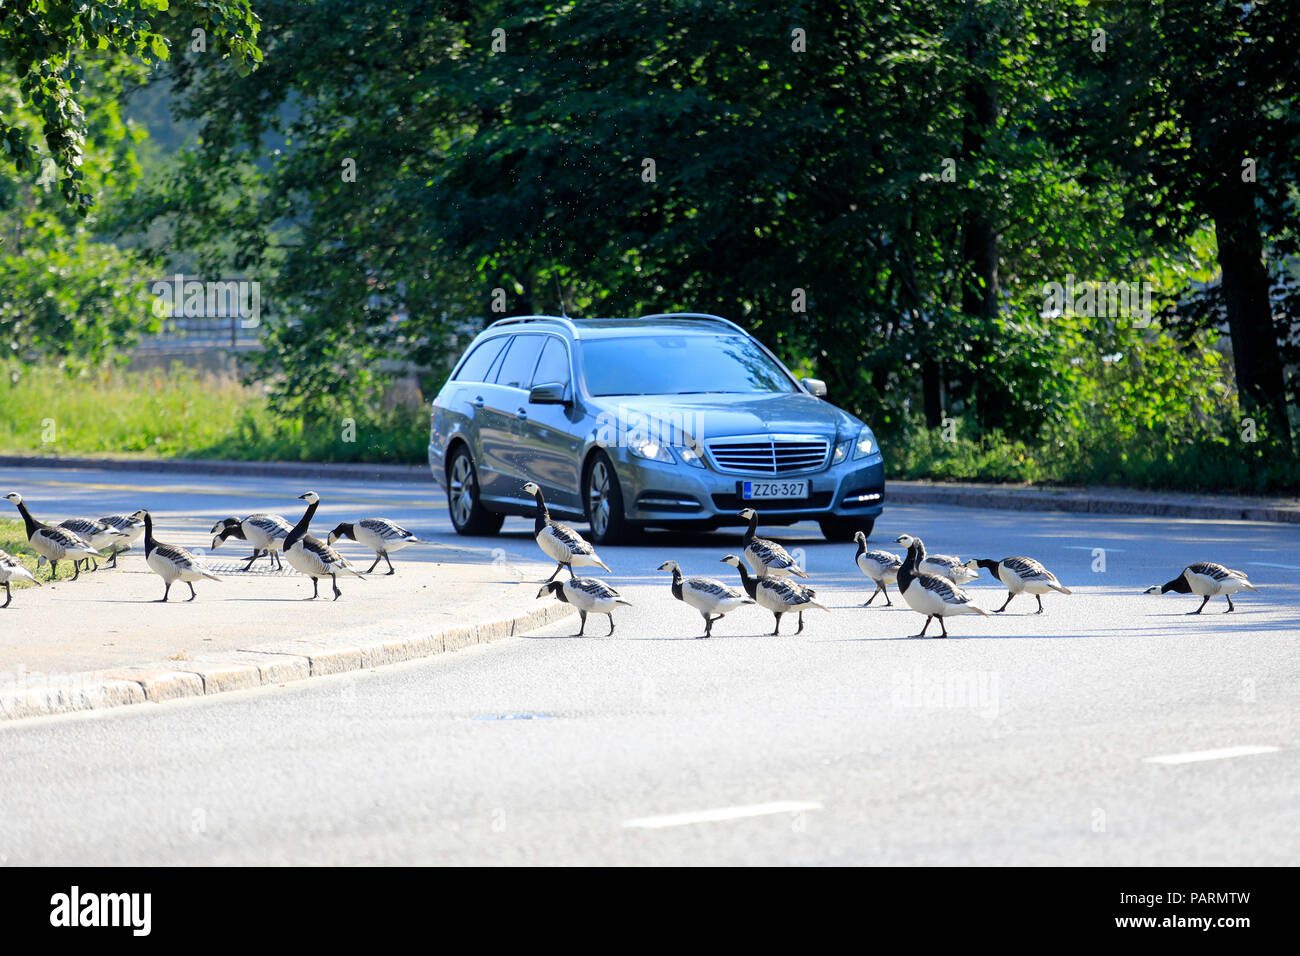 Driver stops and sees that flock of Barnacle geese, Branta leucopsis, cross the street safely. Helsinki, Finland - July 16, 2018. Stock Photo